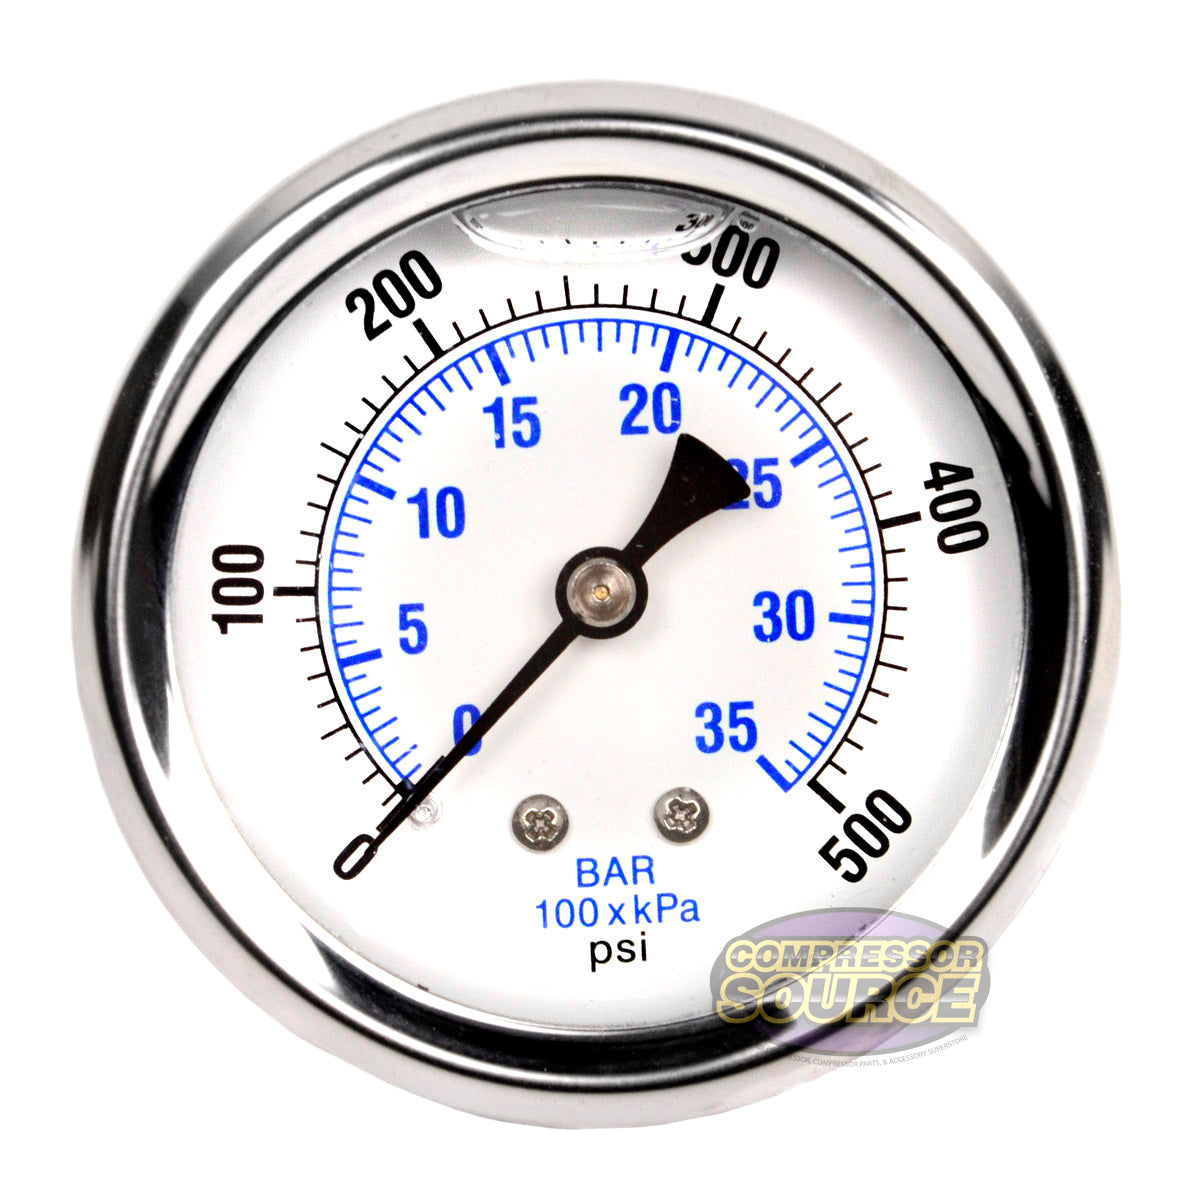 Liquid Filled 0-500 PSI Center Back Mount Air Pressure Gauge With 2.5" Face